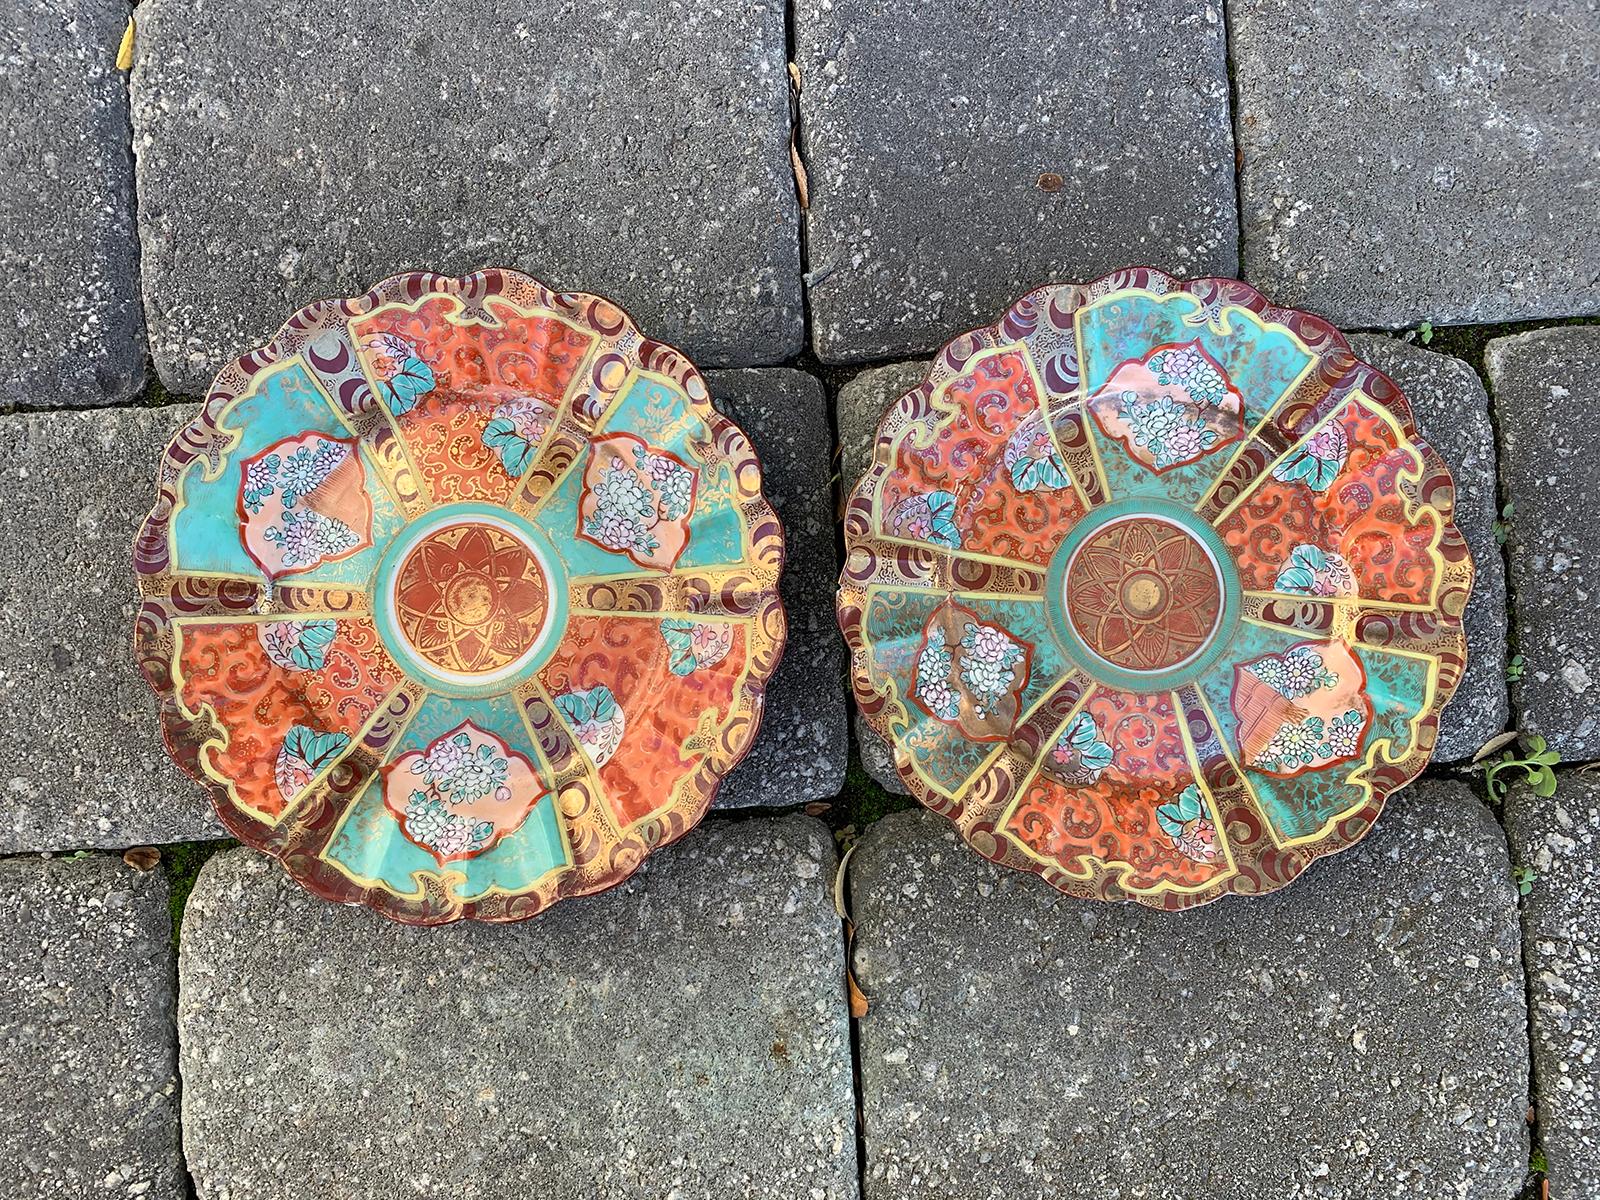 Pair of 19th-20th century Chinese colorful porcelain plates with scalloped edge and gilt details. Old painted label.